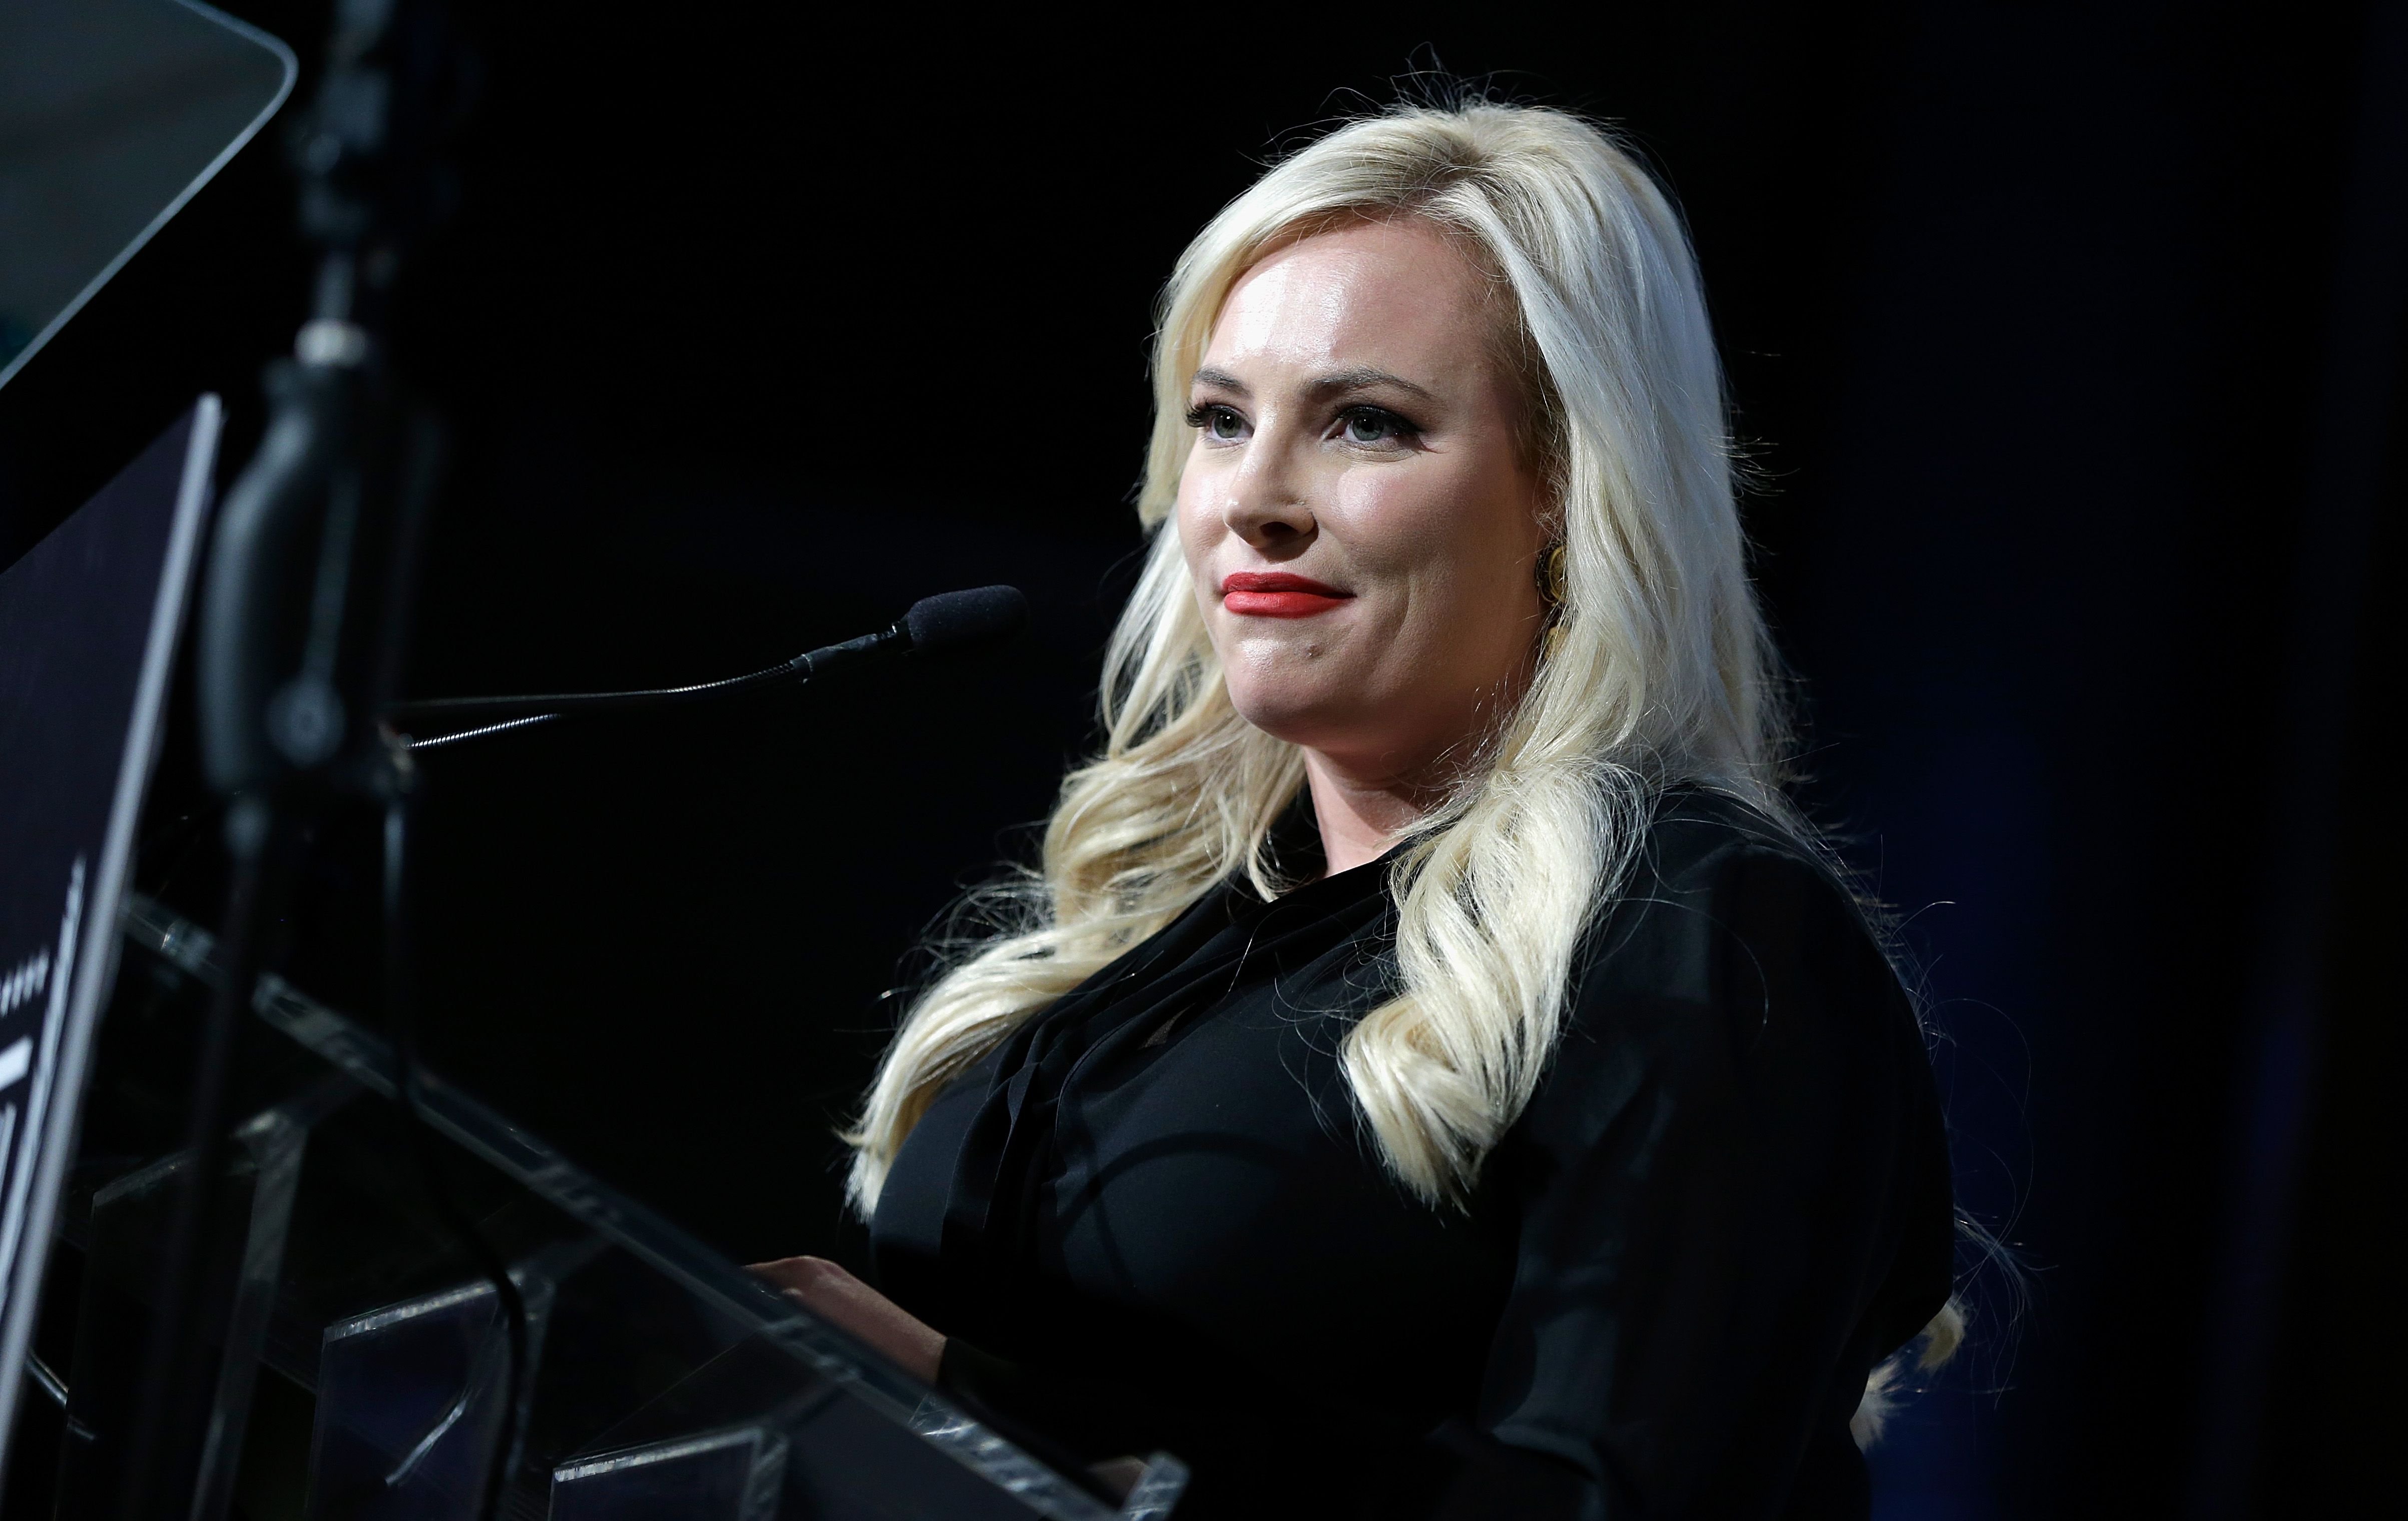 Meghan McCain at 11th Annual IAVA Heroes Gala at Cipriani 42nd Street on November 9, 2017 in New York City | Photo: Getty Images